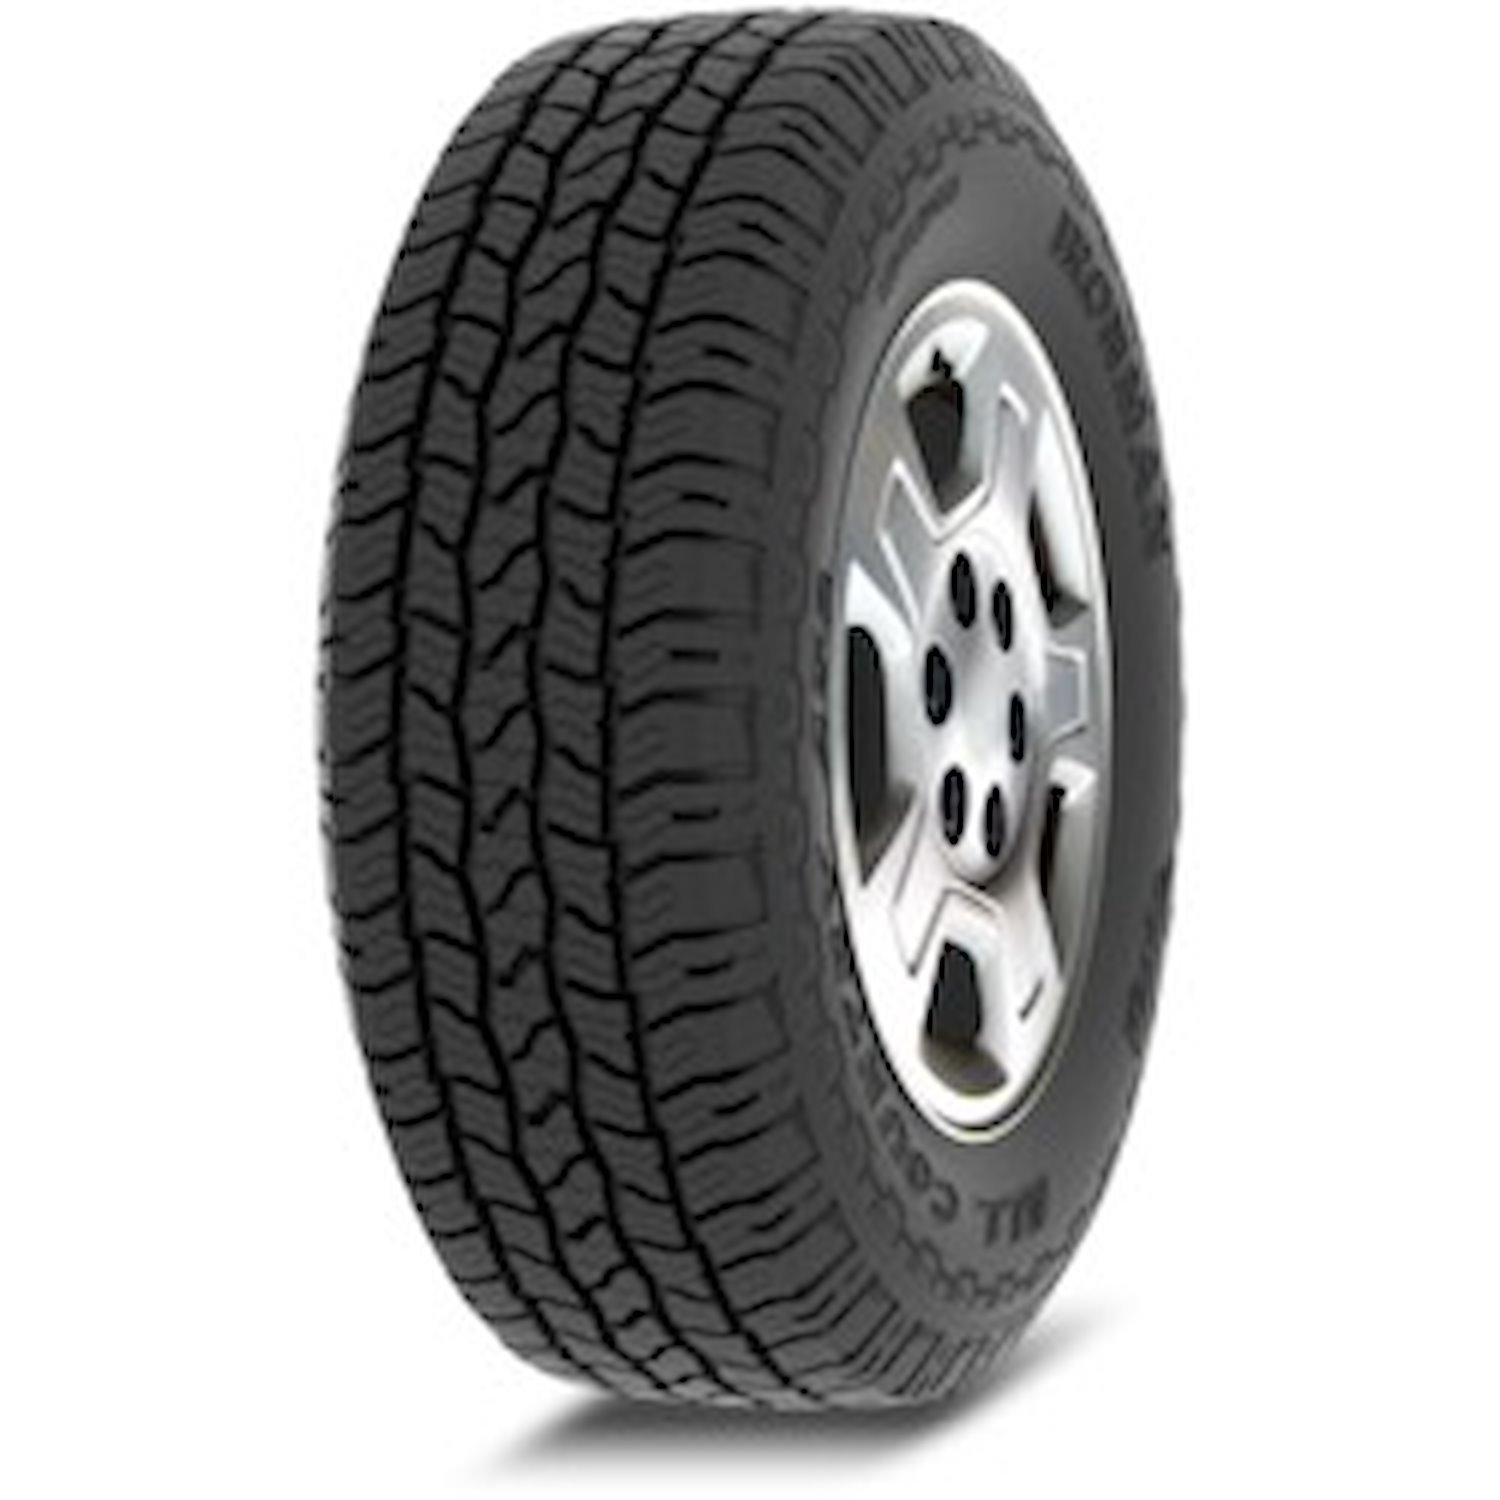 07718 All Country AT2 Tire, LT275/65R20, 126/123S